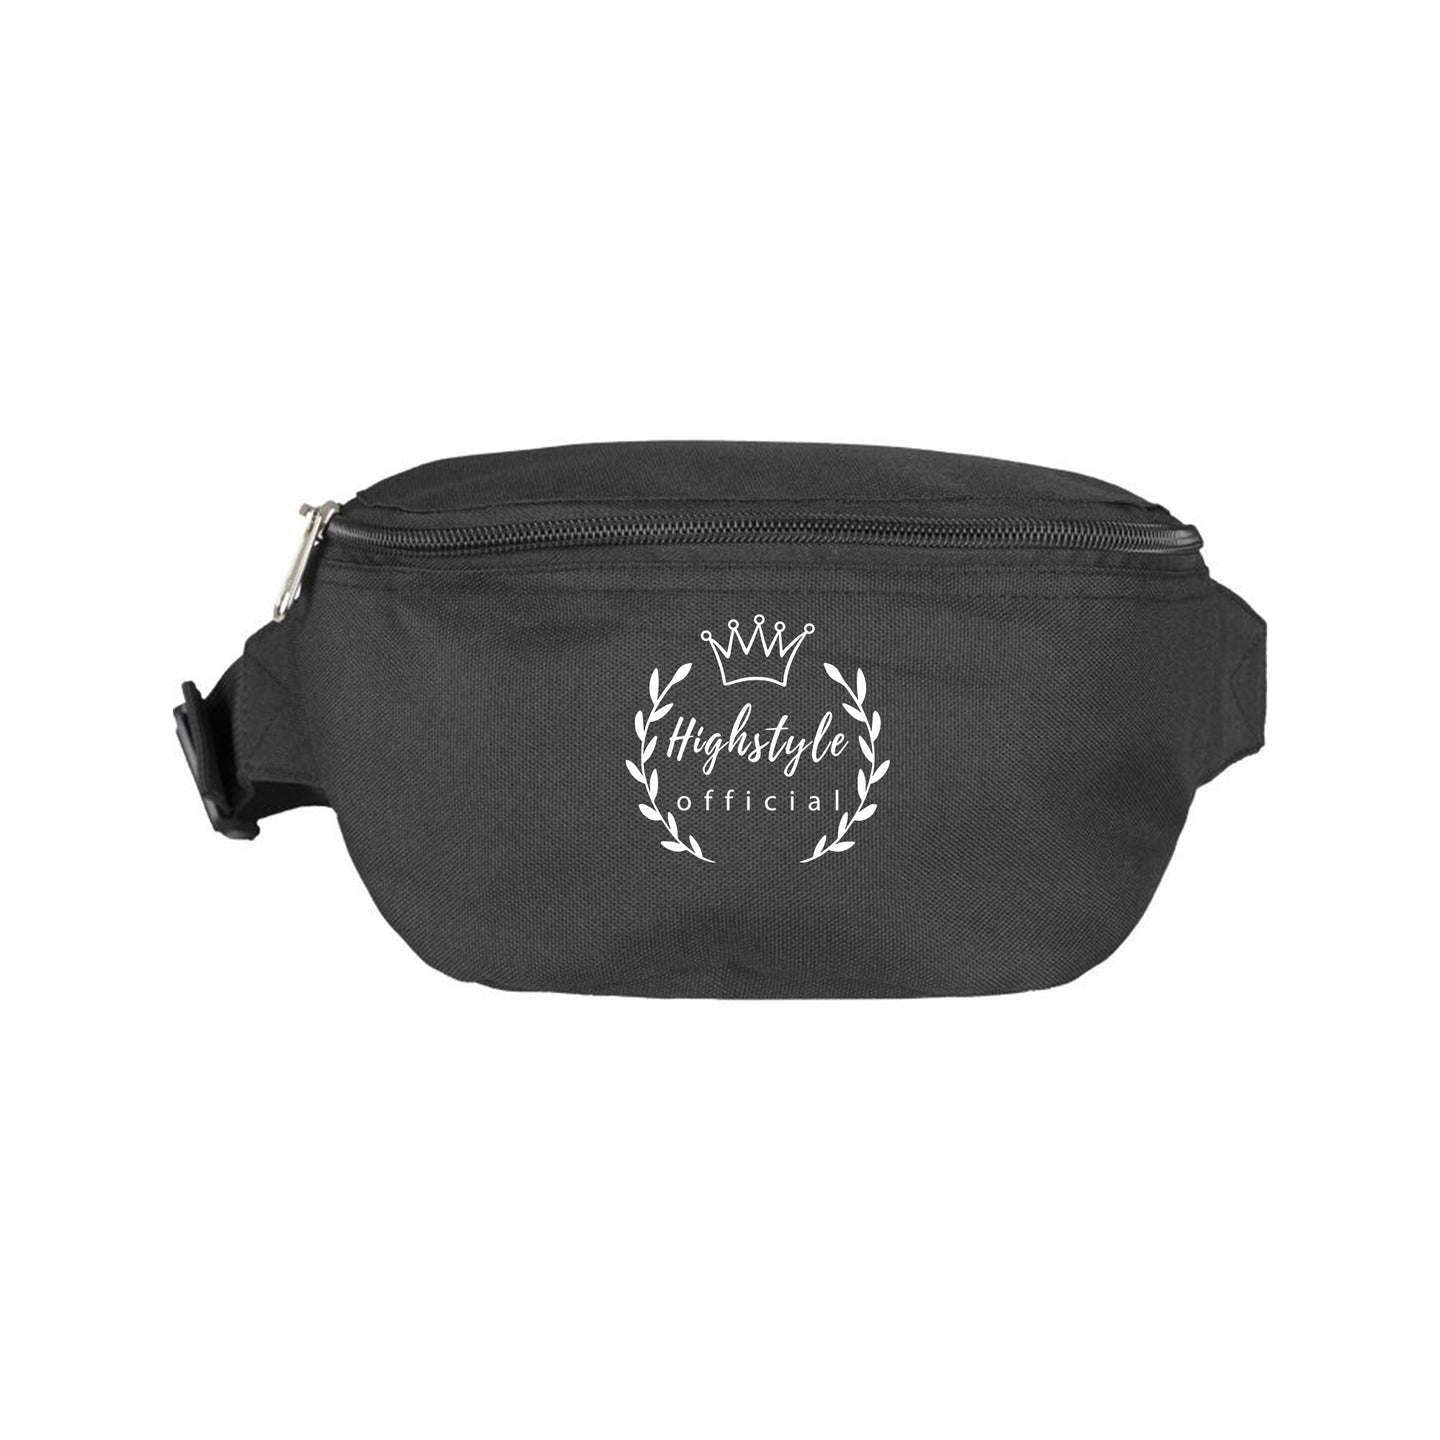 Highstyle official Hip-bag